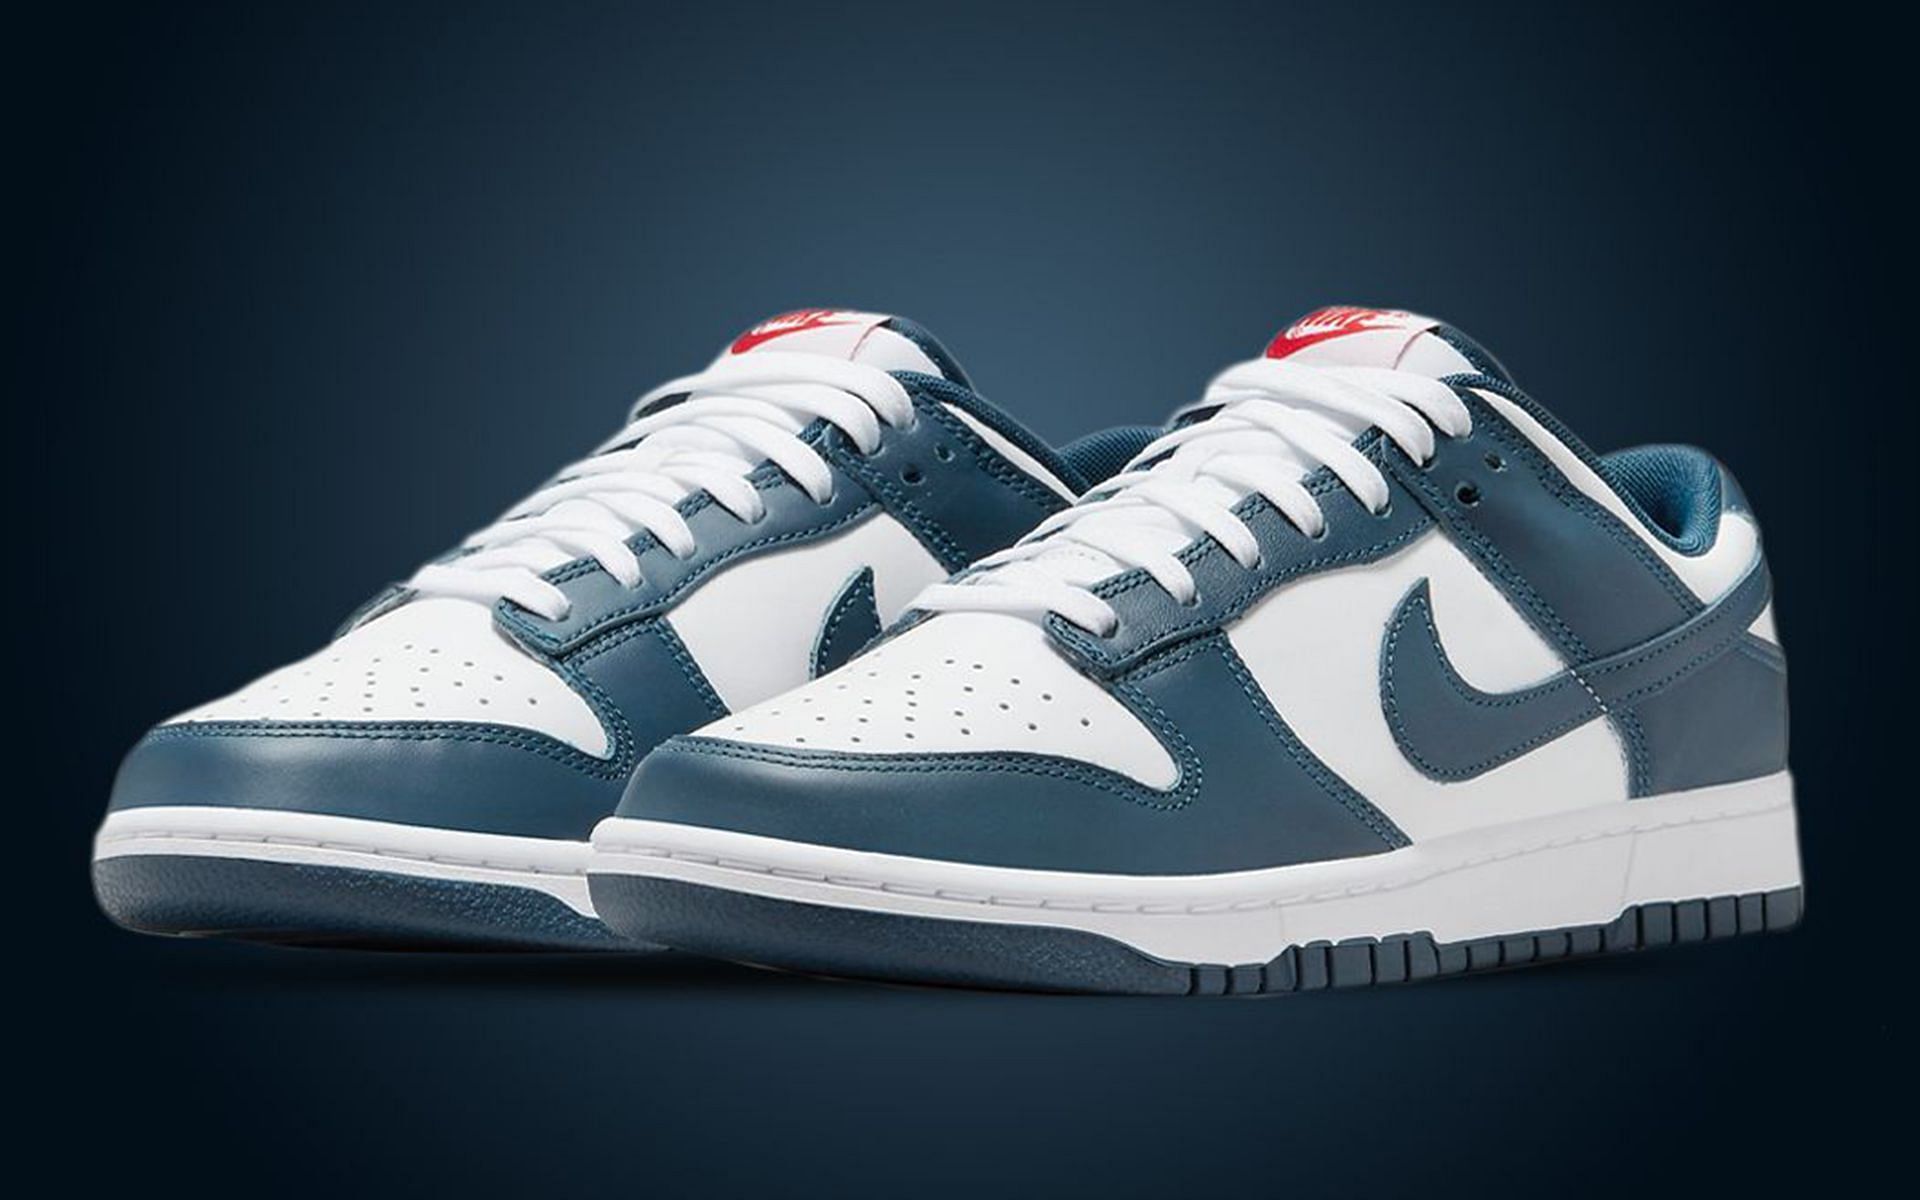 Where to buy Nike Dunk Low Valerian Blue shoes? Price, release